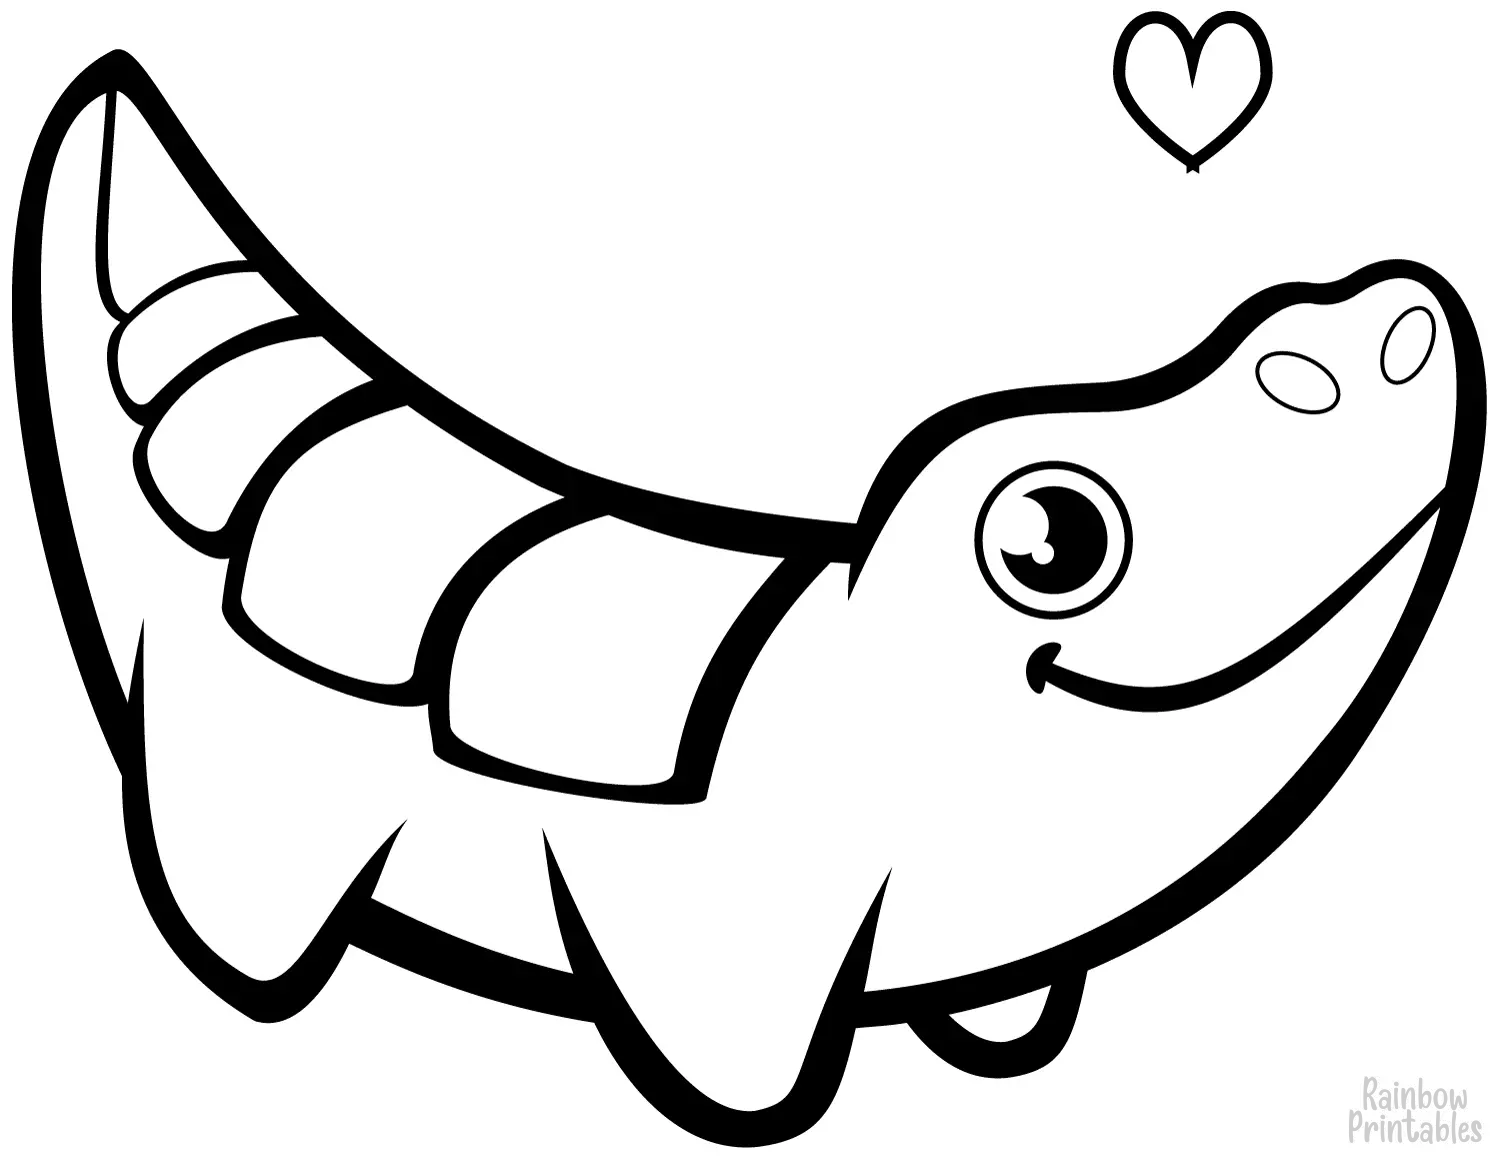 adorable-love-heart-cute-doodle-drawing-crocodile-coloring-page-for-kids